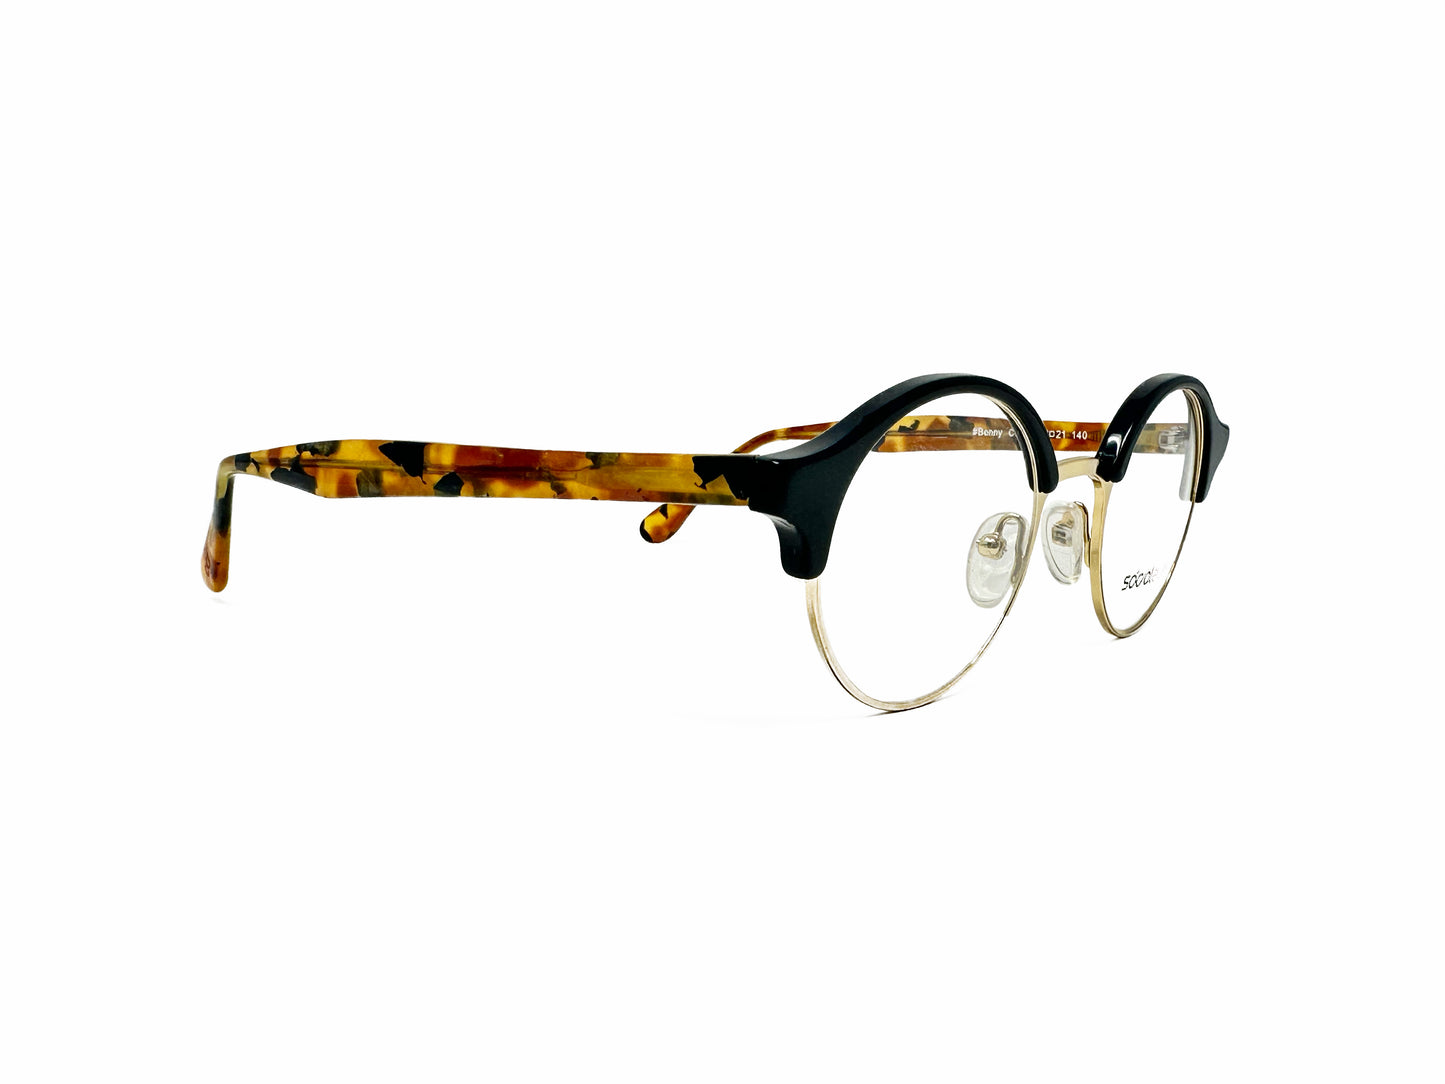 Social Eyes round metal, with acetate trim, optical frame. Model: Benny. Color: C01 - Gold metal with black trim and tortoise temples. Side view.